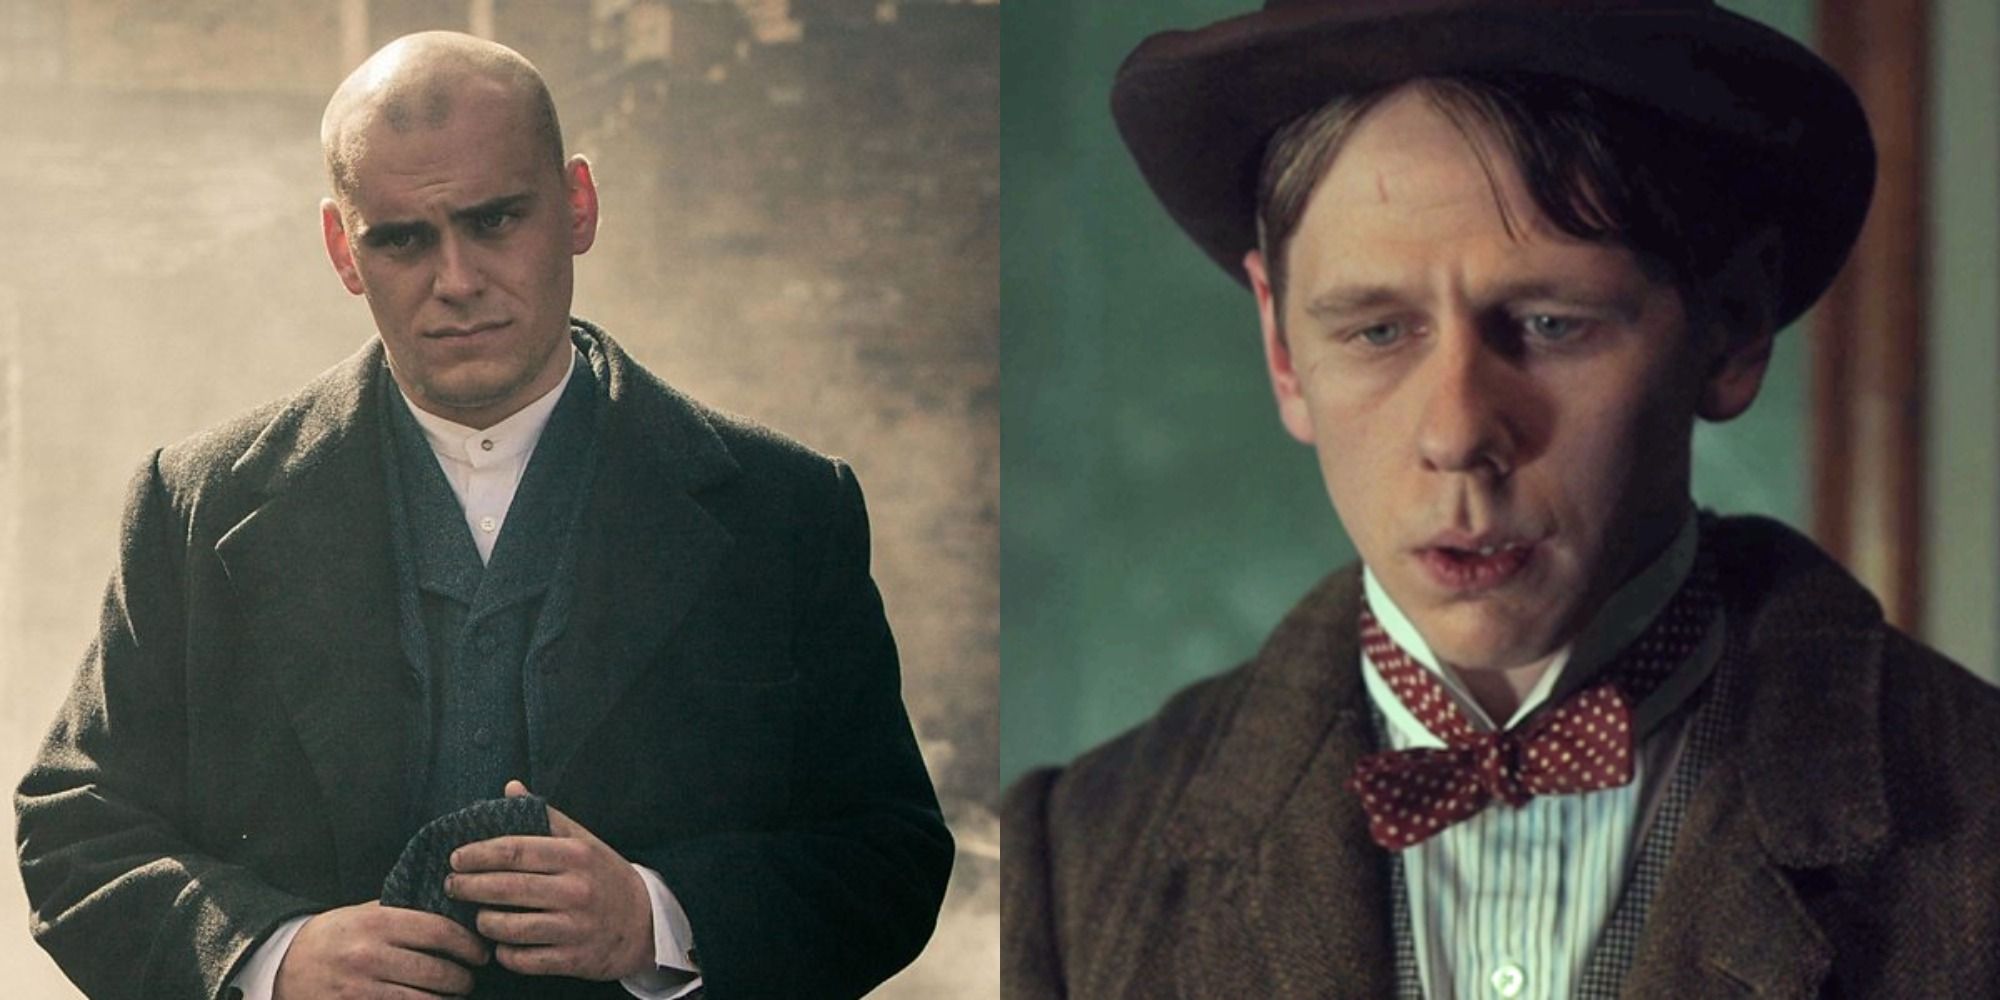 Split image of Danny Whizz-Bang and the Digbeth kid from Peaky Blinders